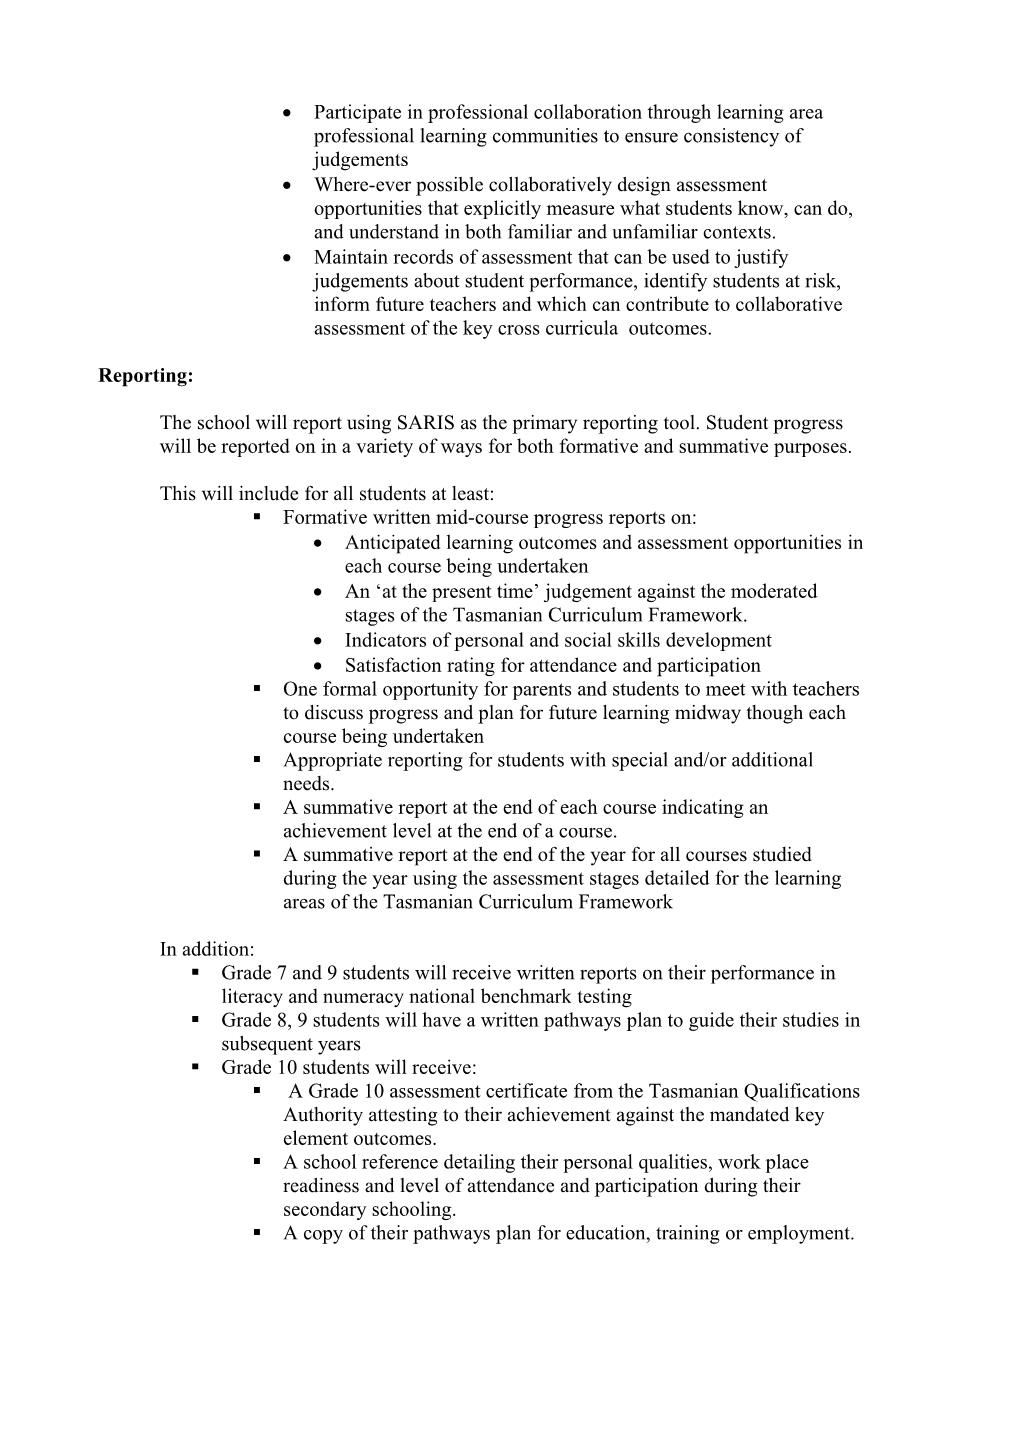 Draft Assessment and Reporting Policy 2005